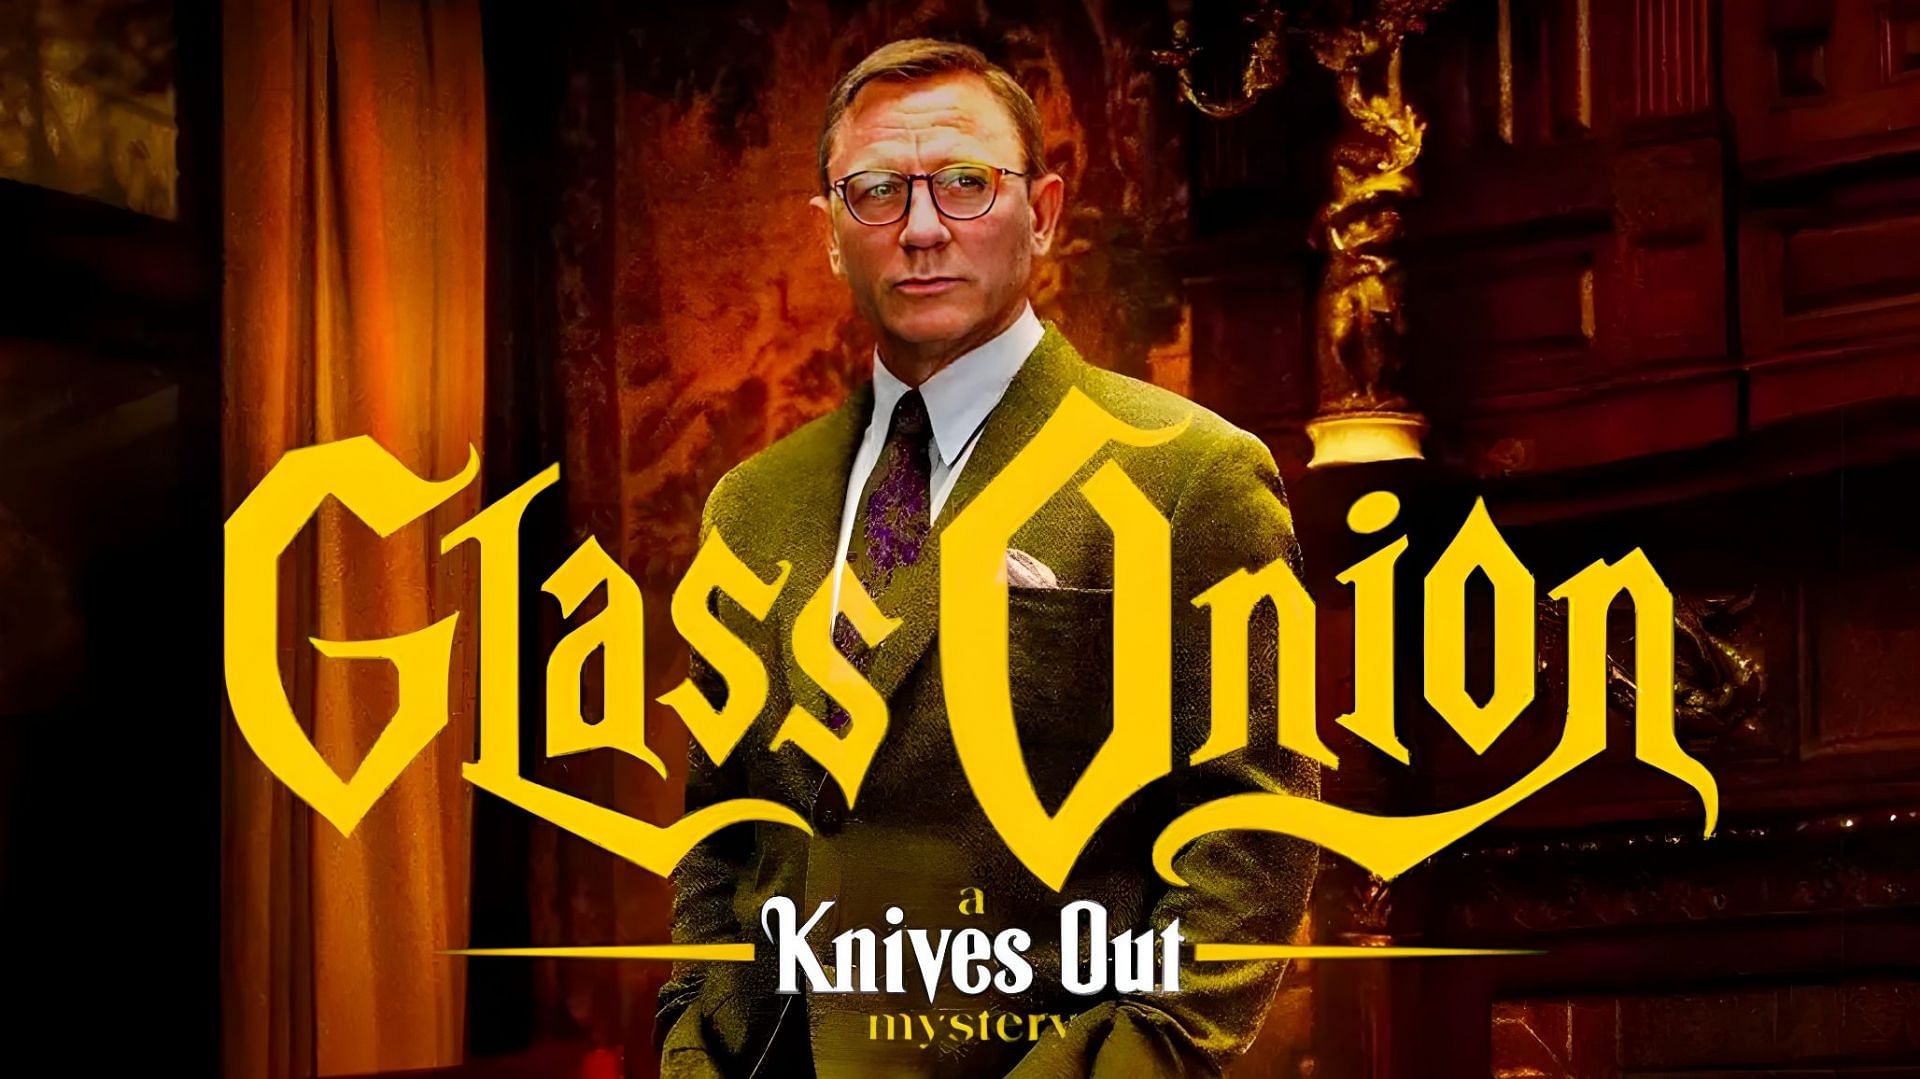 Glass Onion is another brilliant Rian Johnson murder mystery